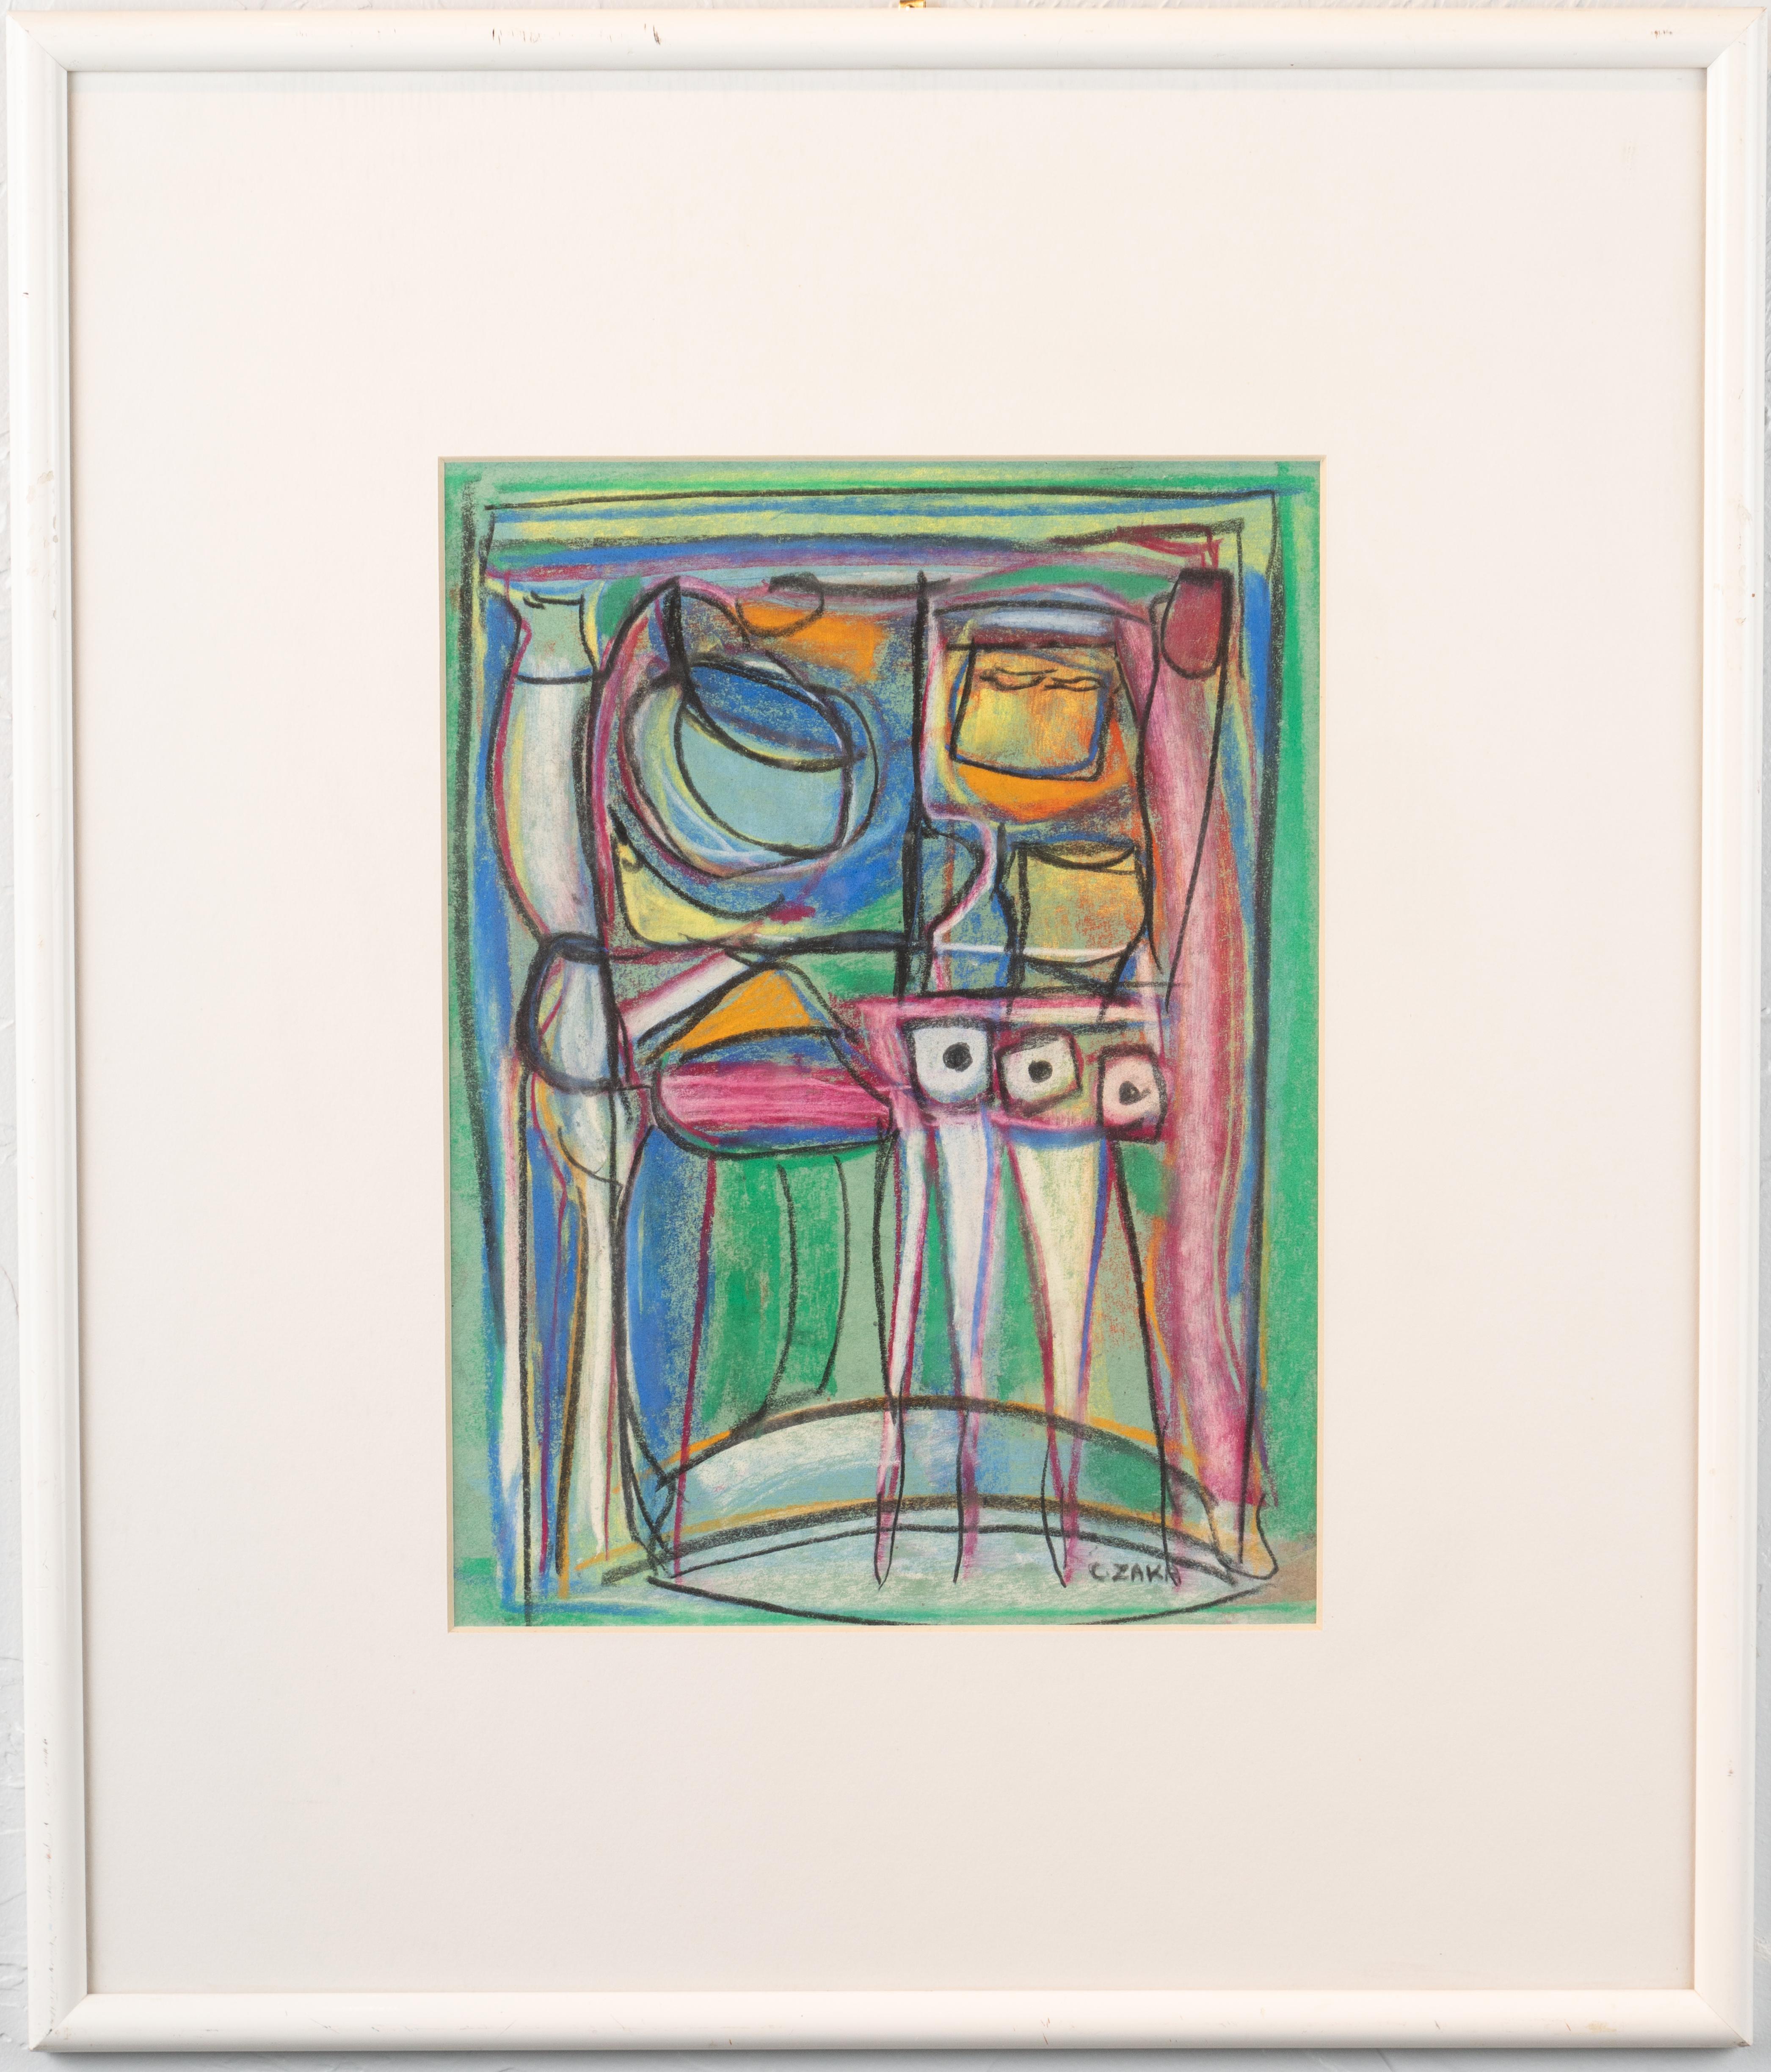 This framed 20.5" x 17.5" pastel drawing won paper by artist Catherine Zakas depicts abstracted figures in a colorful palette. In this pastel on paper the artist has used black lines to divide the composition into four quads with gestural lines and